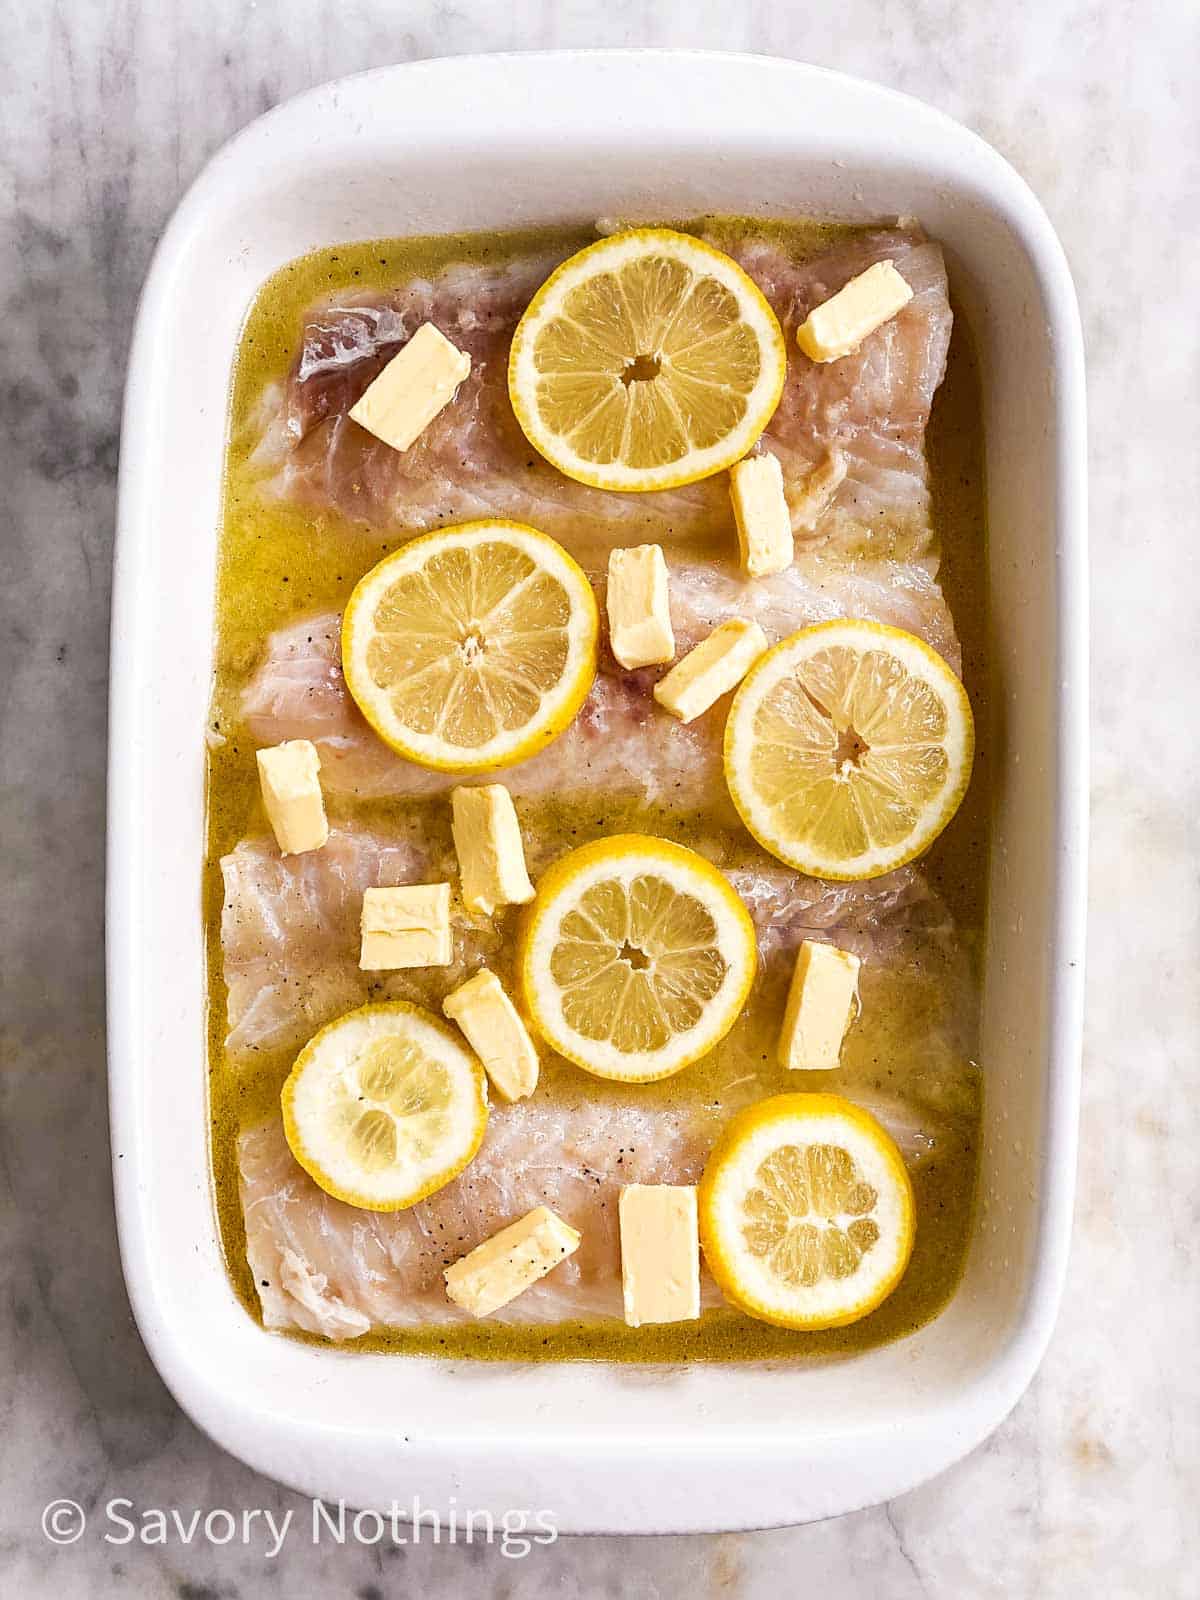 unbaked cod loin fillets in white casserole dish, topped with lemon slices and butter pieces